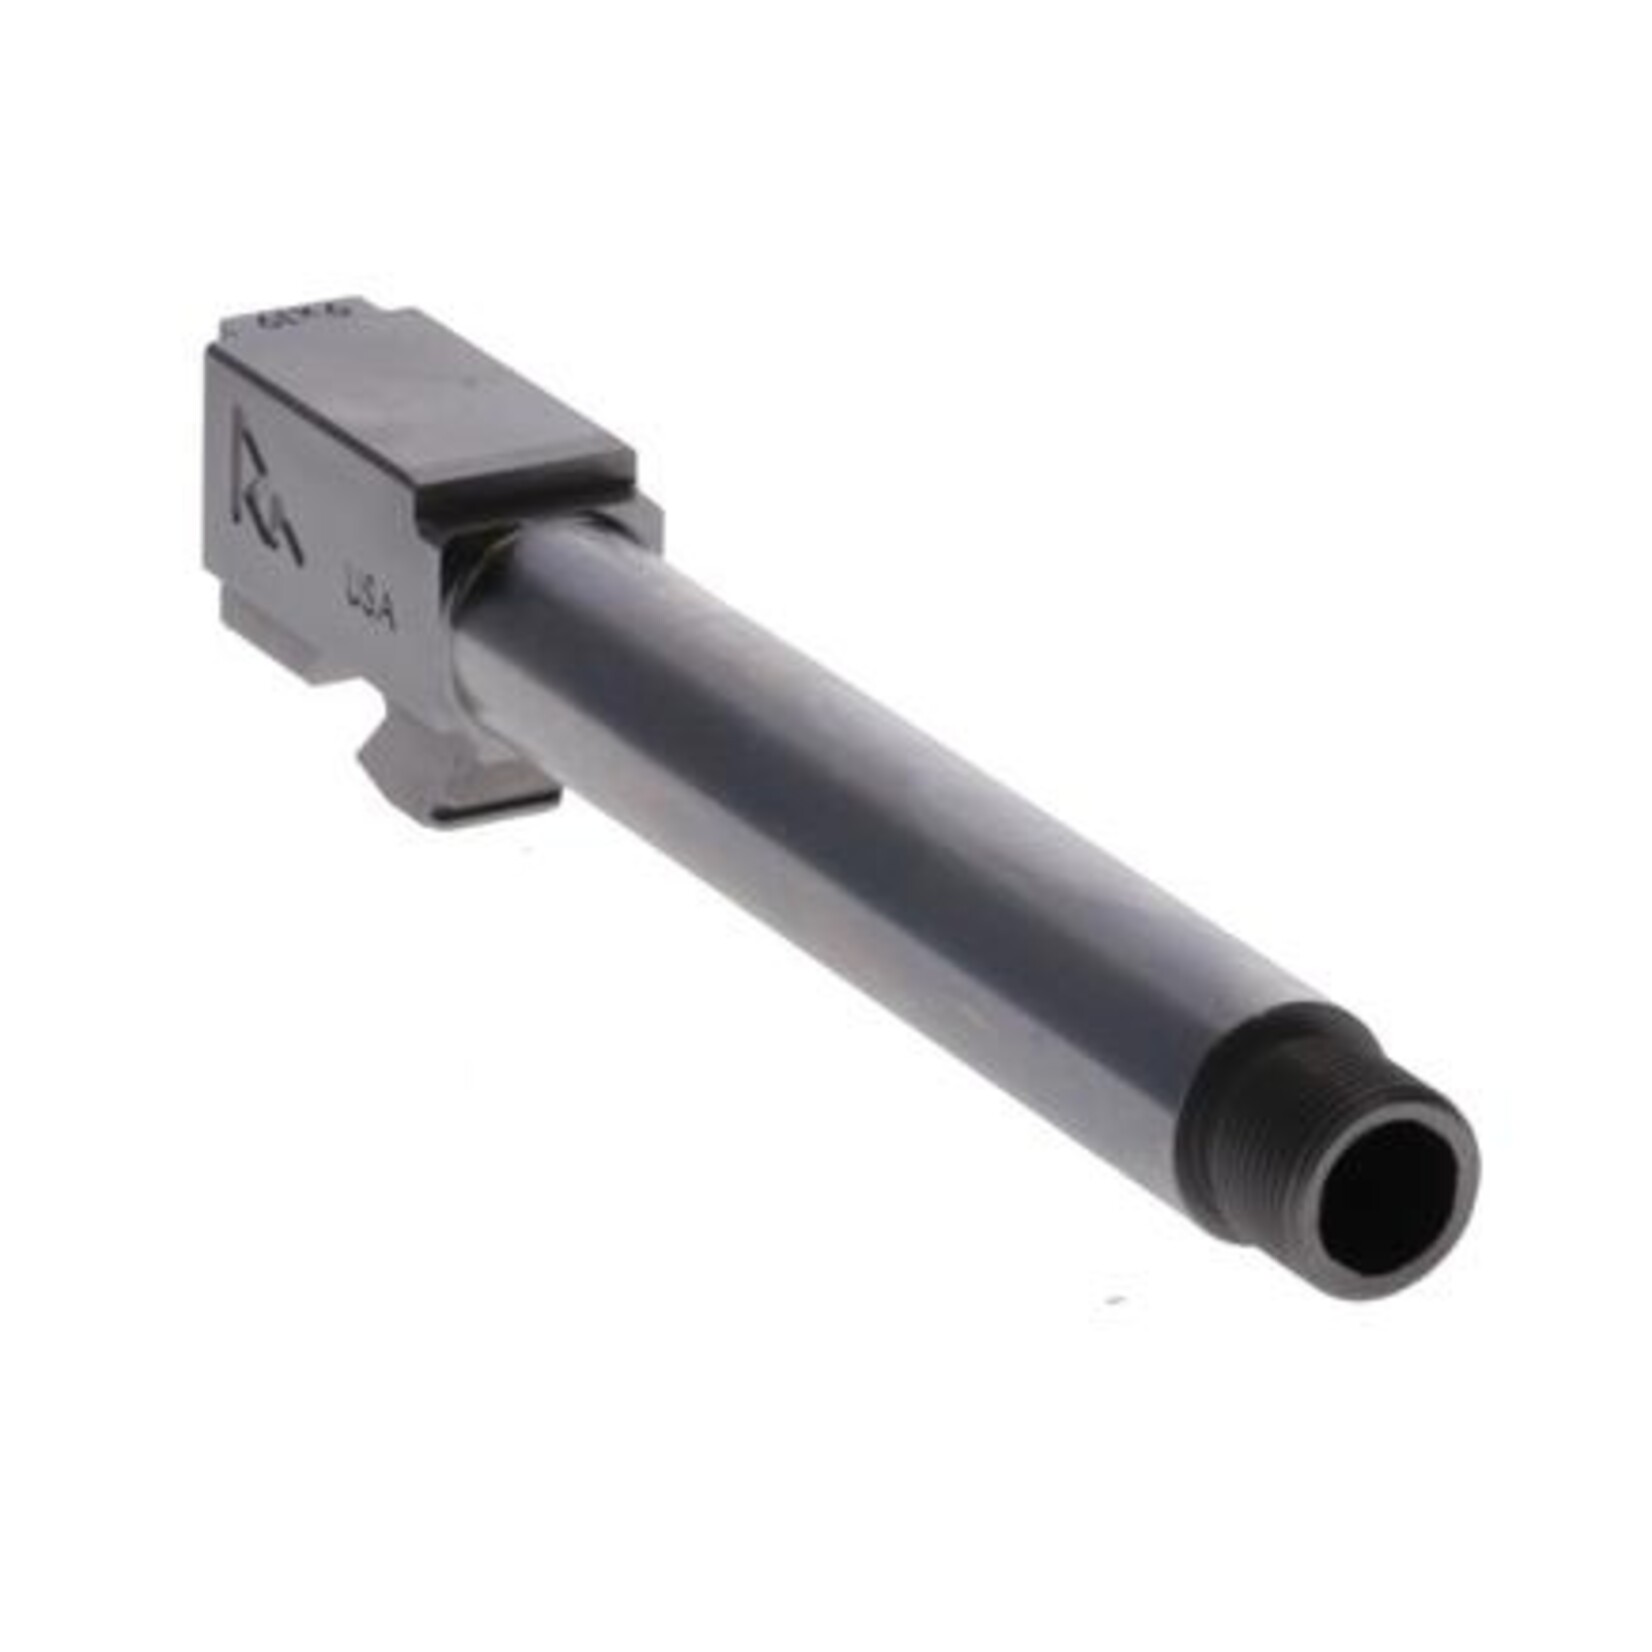 RIVAL ARMS RIVAL ARMS V2 STAINLESSS PVD THREADED BARREL FOR GLOCK MODEL 17 GEN3/4